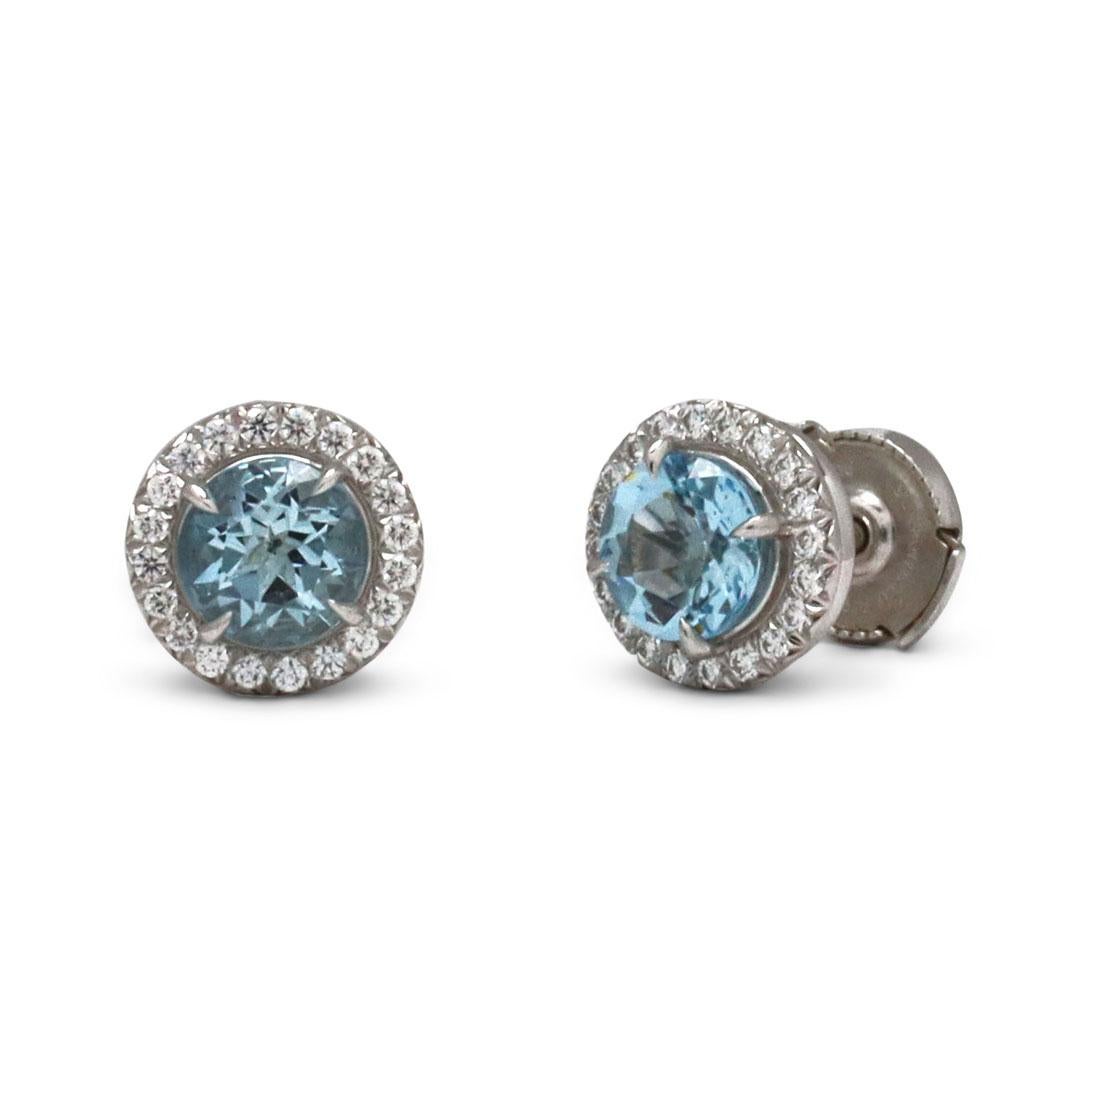 Authentic Tiffany & Co. 'Soleste' earrings each center on a 6mm round aquamarine stone (approx. 1.40cttw) surrounded by high quality round brilliant cut diamonds (approx .40cttw). Signed Tiffany & Co., PT950. The earrings are presented with the